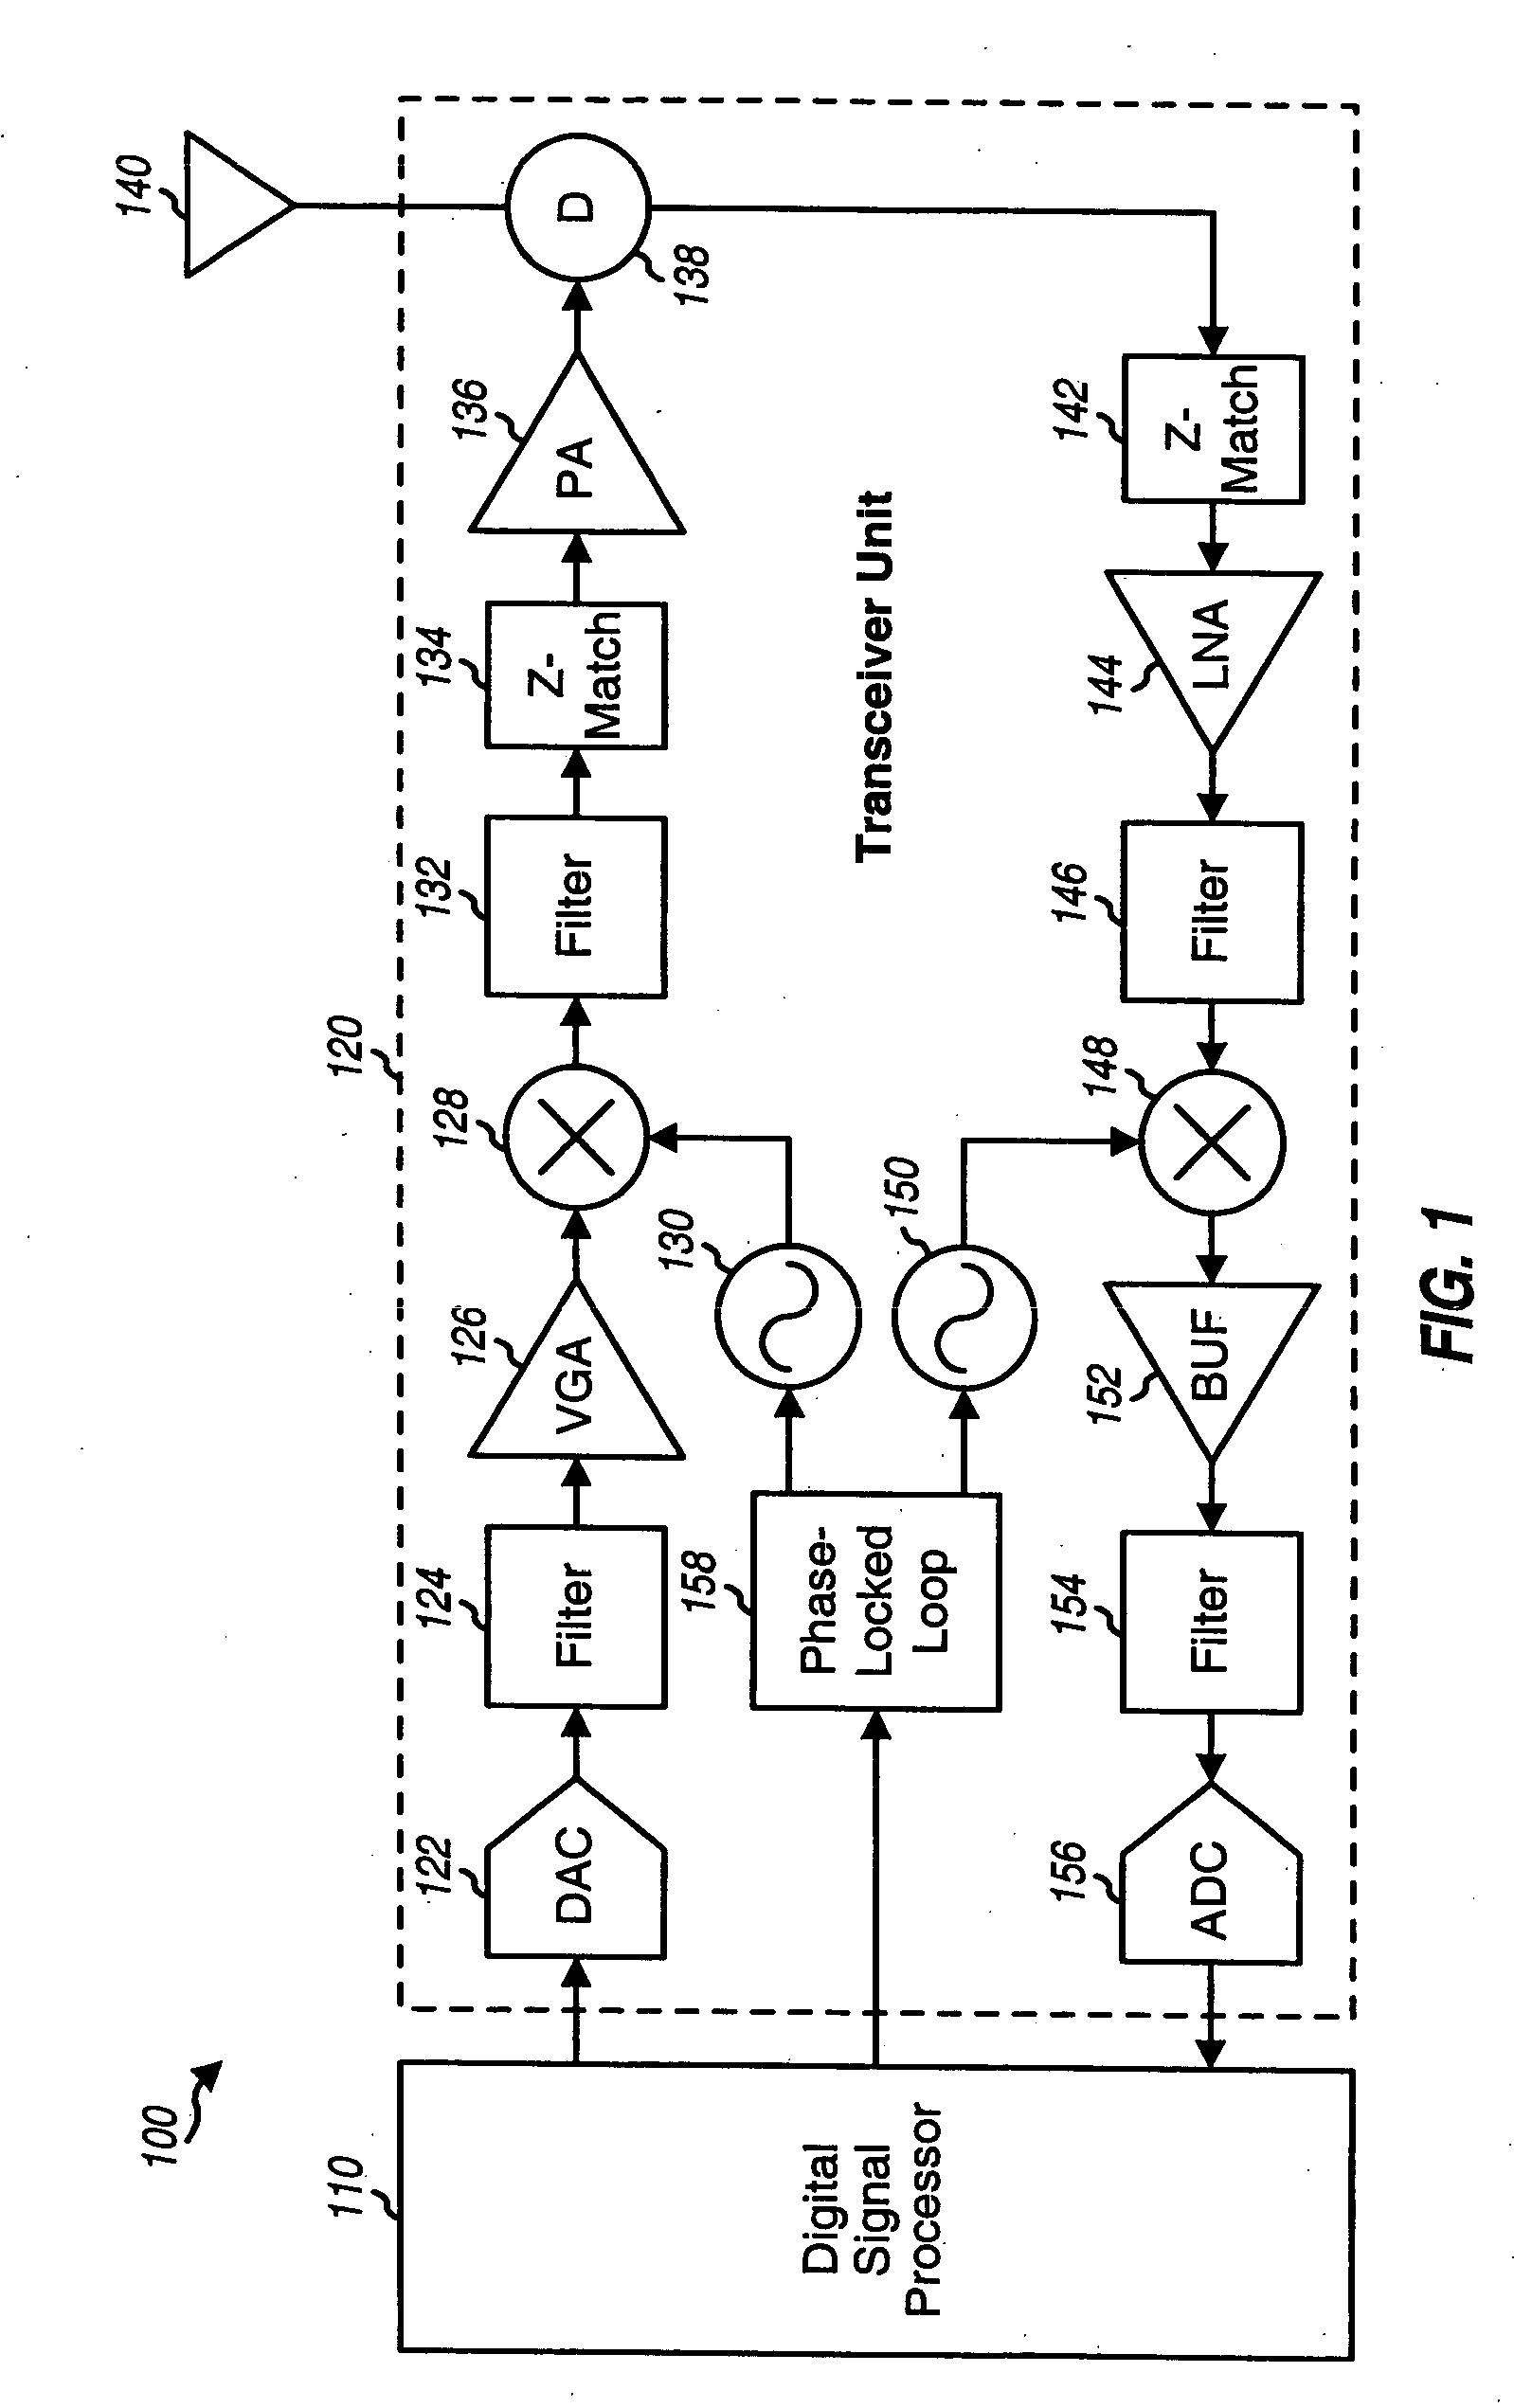 Variable inductor for integrated circuit and printed circuit board